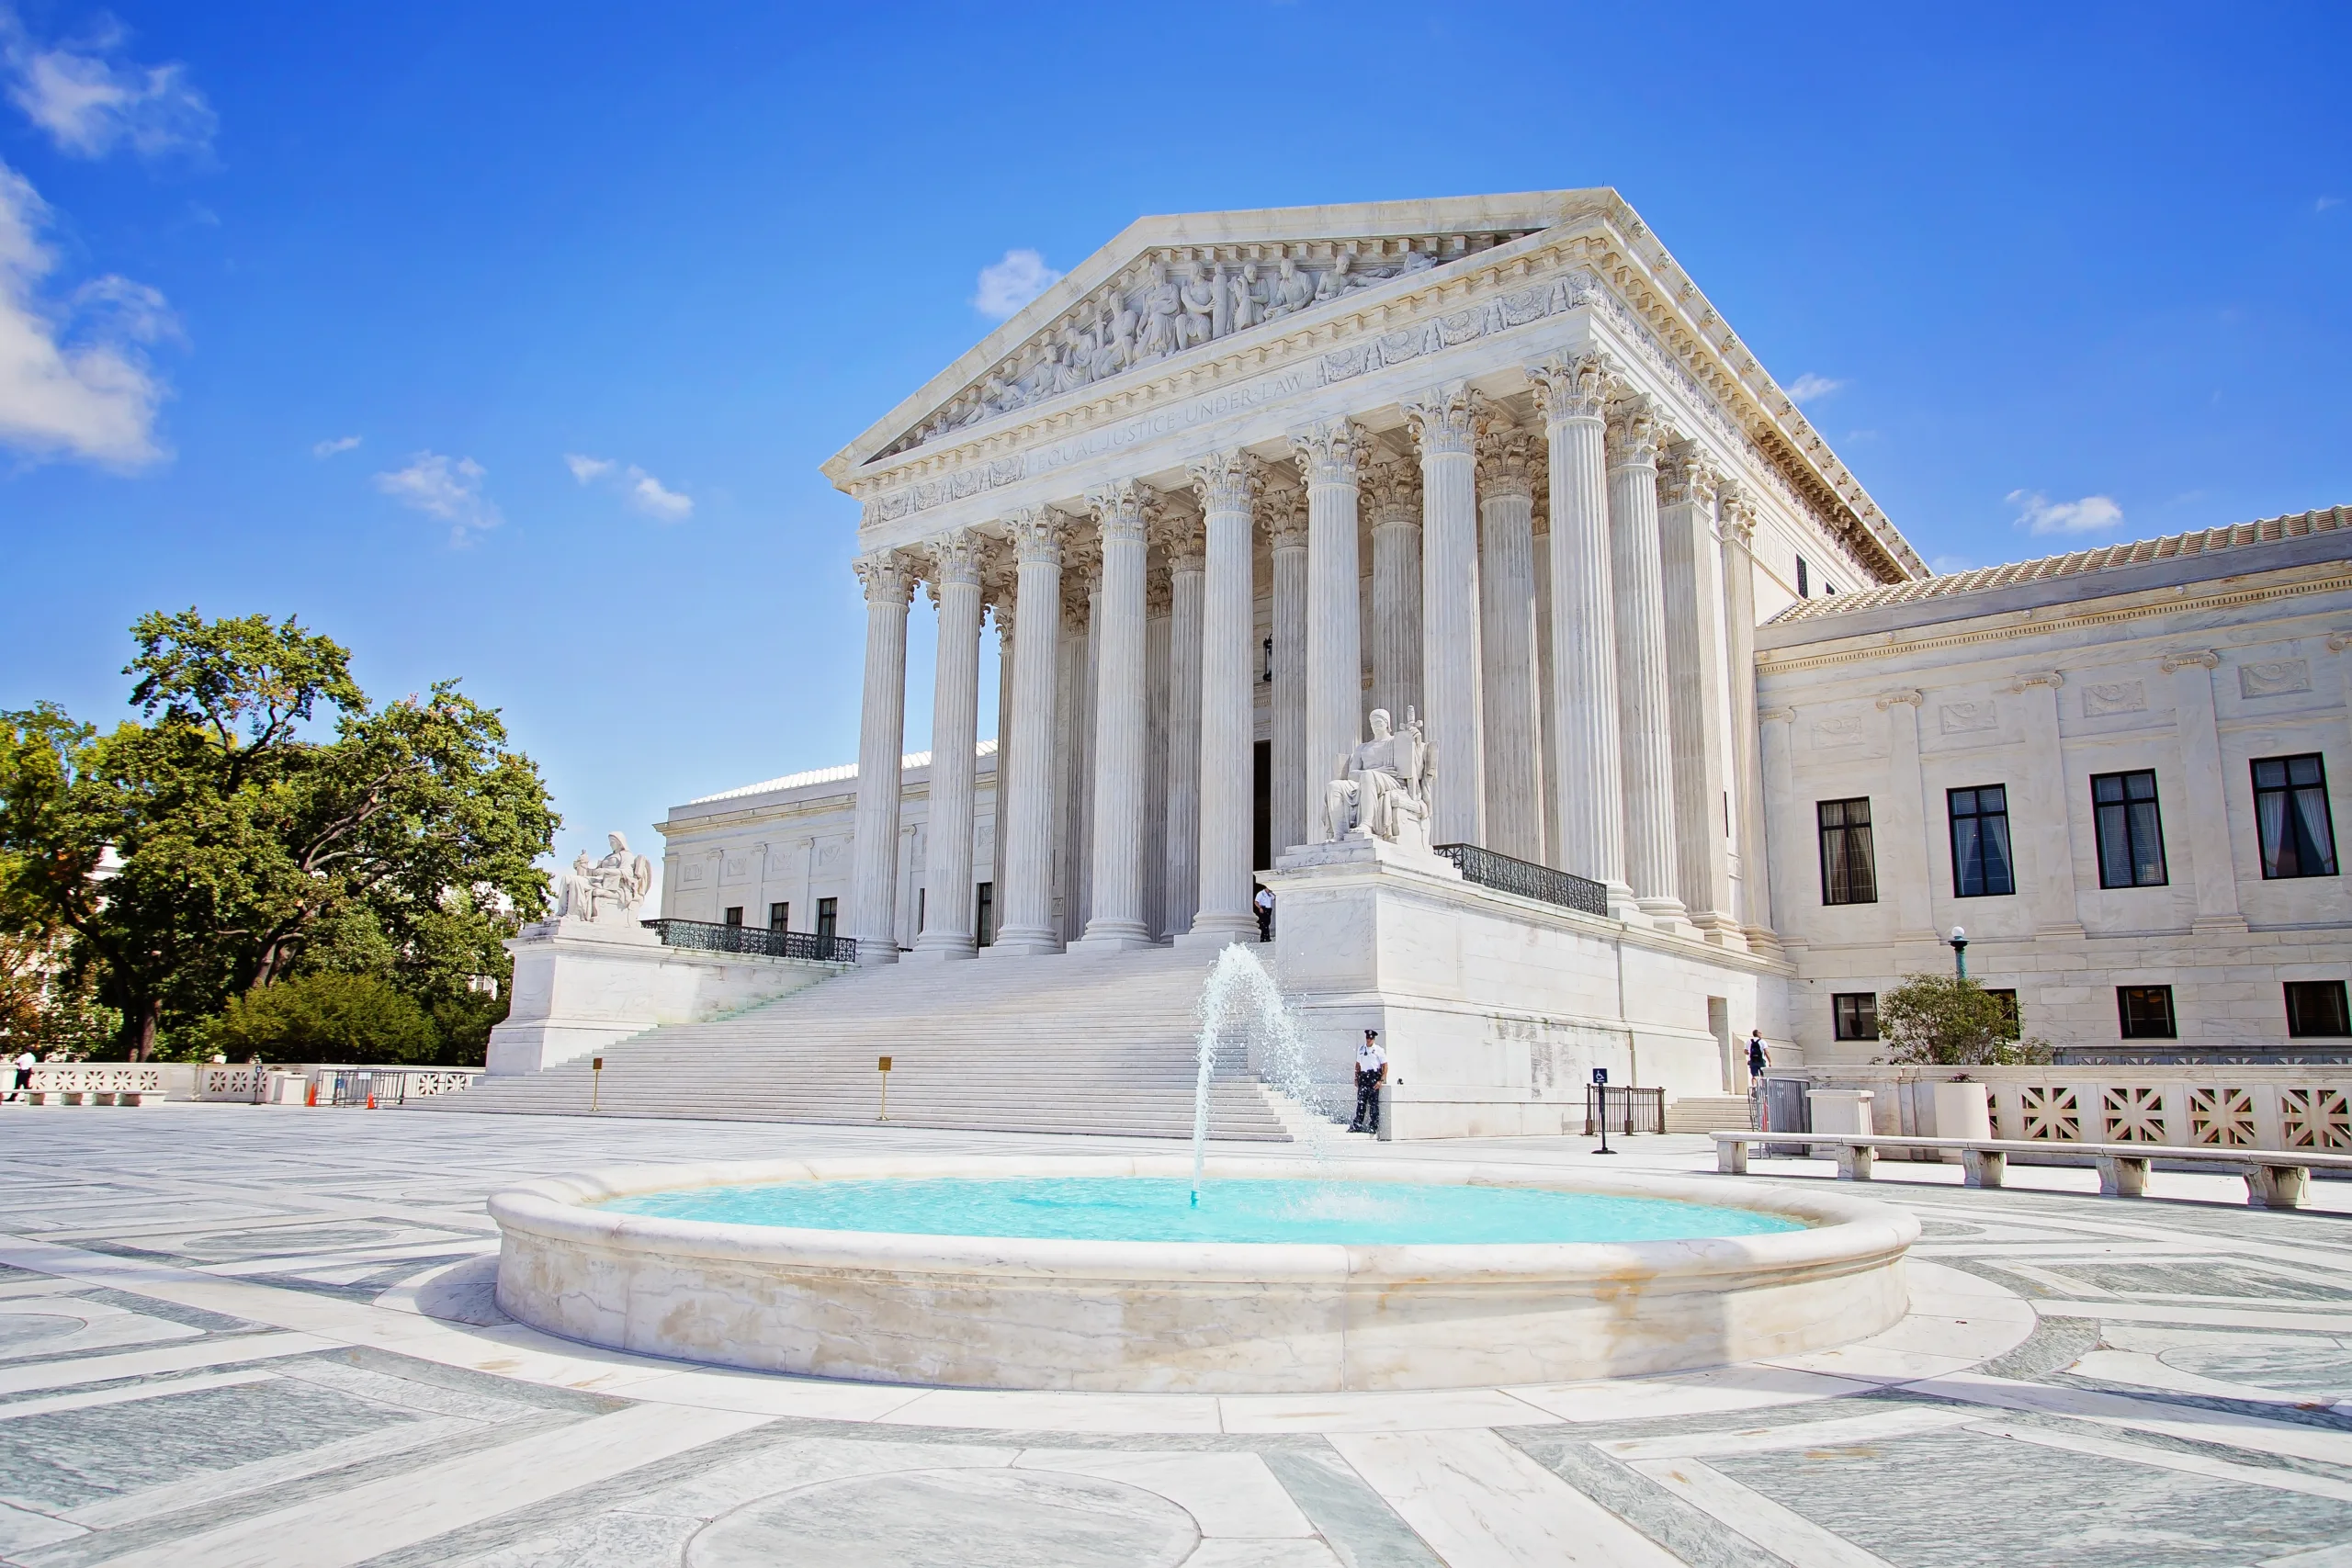 Image of the Supreme Court building with text "Supreme Court Upholds Trump's Right to Run in 2024